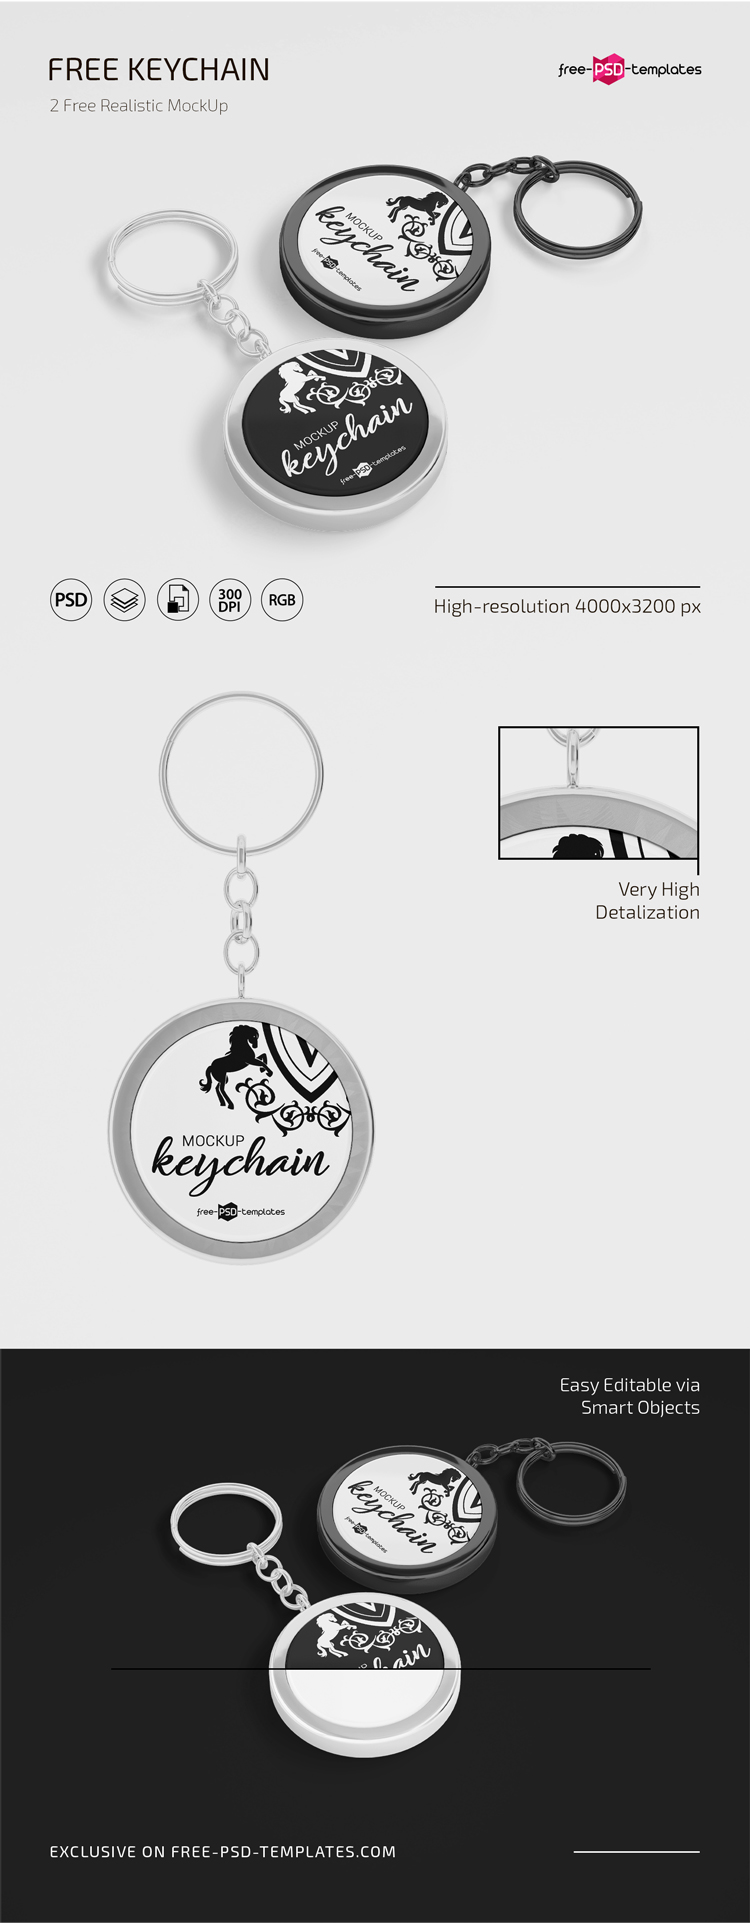 Keychain Mockup Psd Free Download : Free Keychain Mockup Psd Files by Zee Que | Designbolts on ...